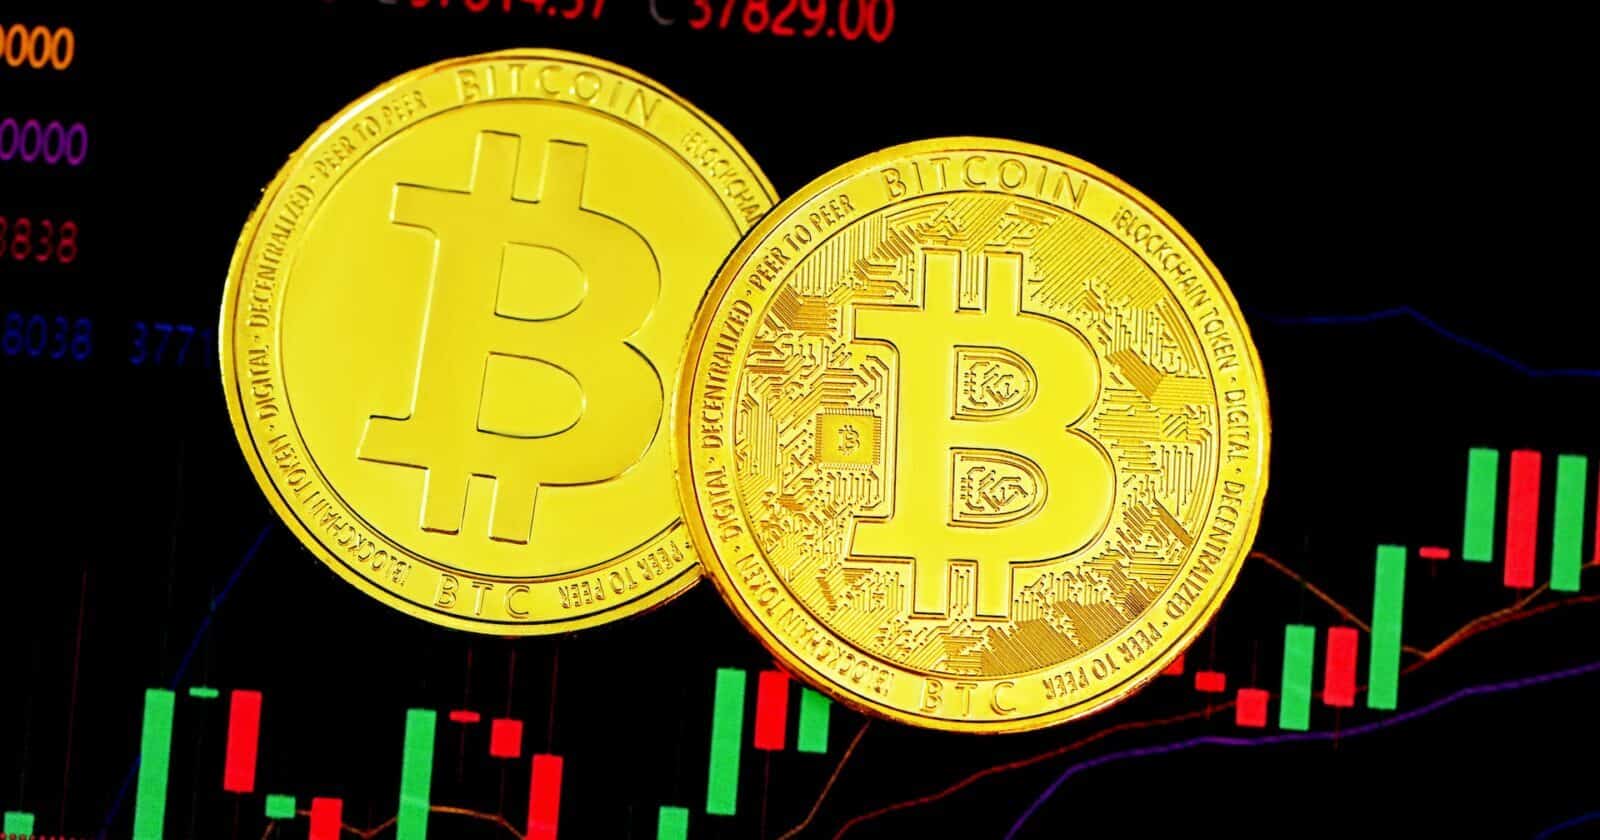 Bitcoin: Veteran Trader Calls Two Major Price Pullers As "Non-Events"